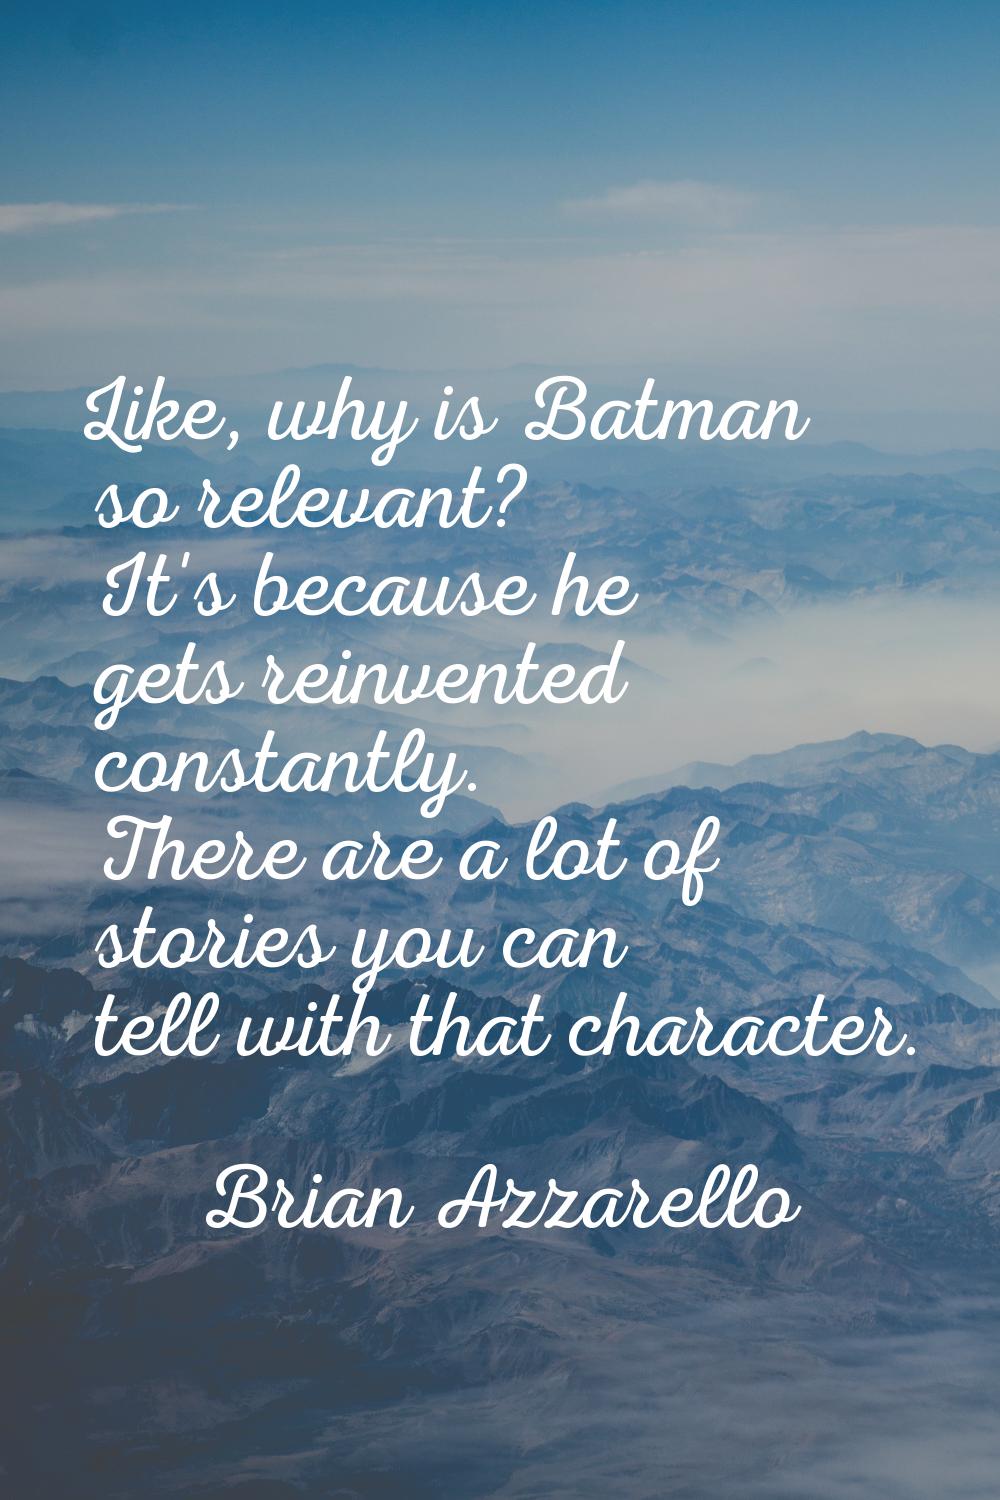 Like, why is Batman so relevant? It's because he gets reinvented constantly. There are a lot of sto